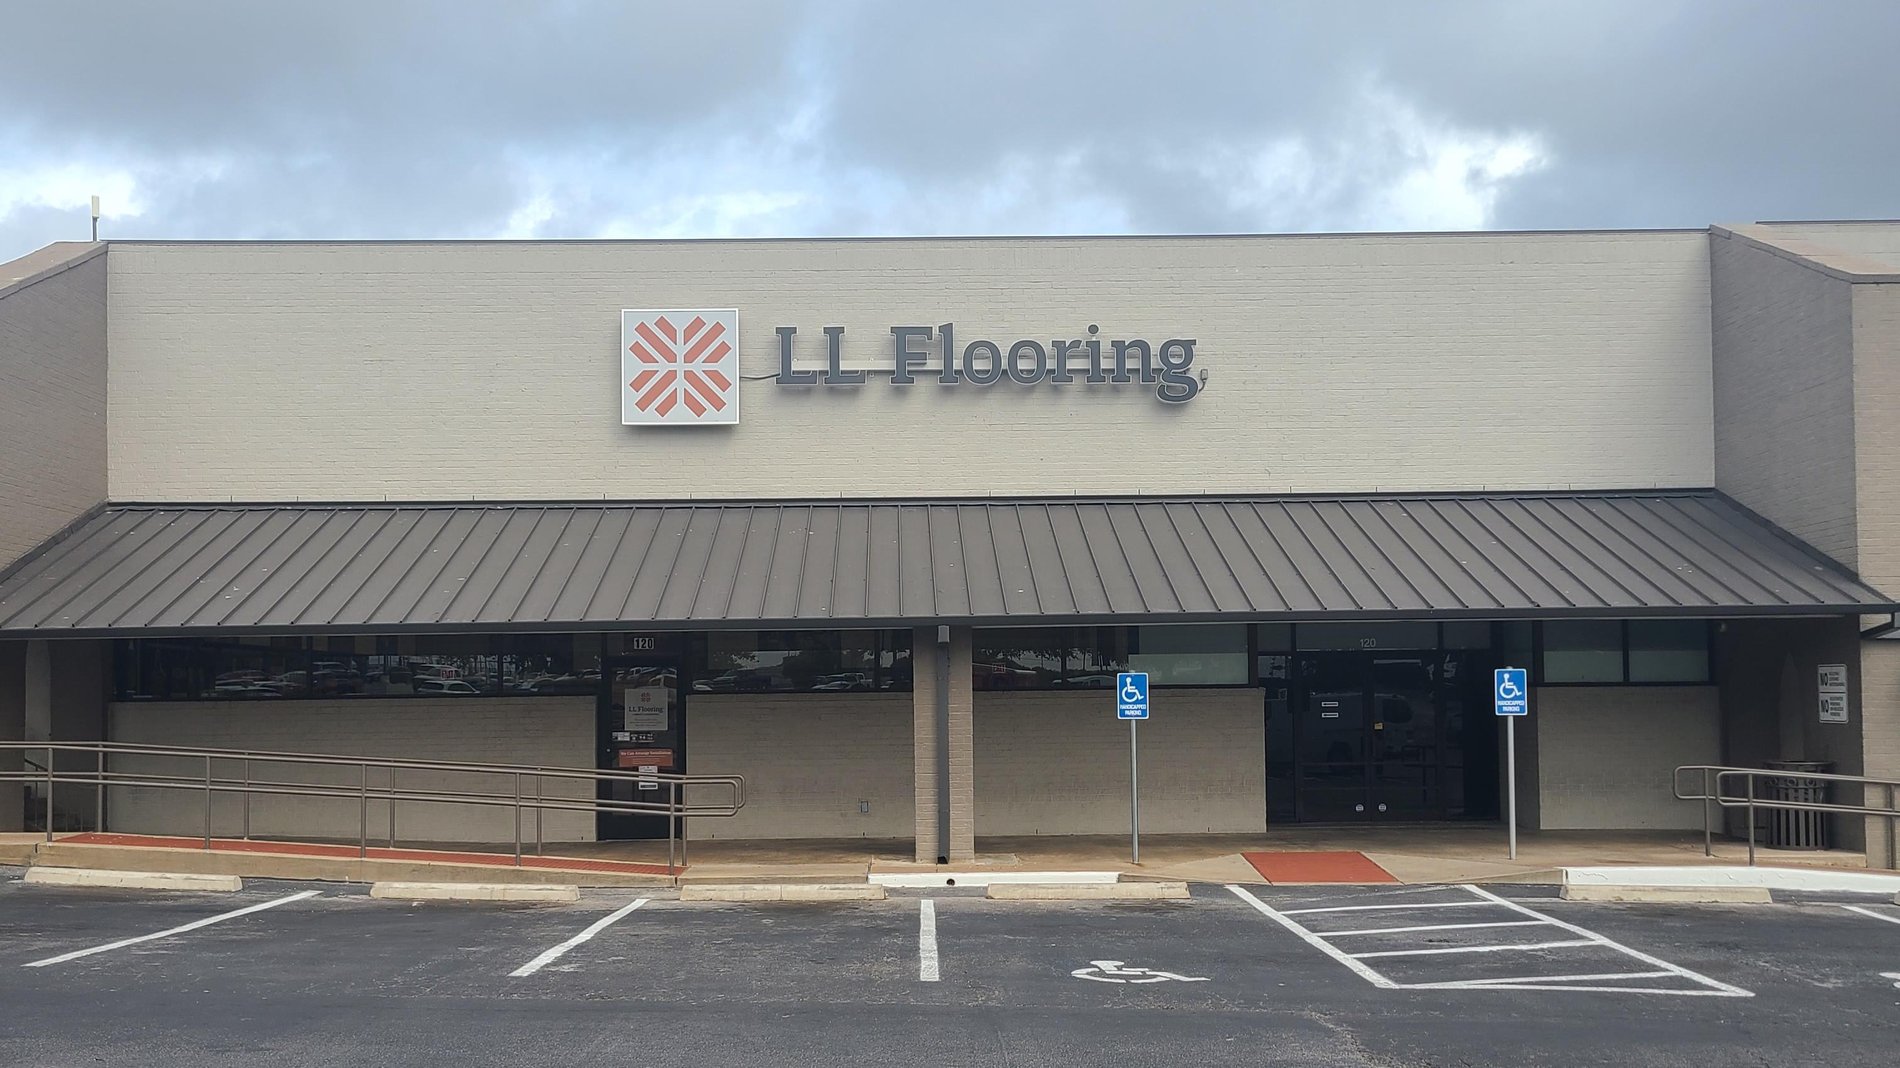 LL Flooring #1299 Austin | 801 East William Cannon Drive | Storefront